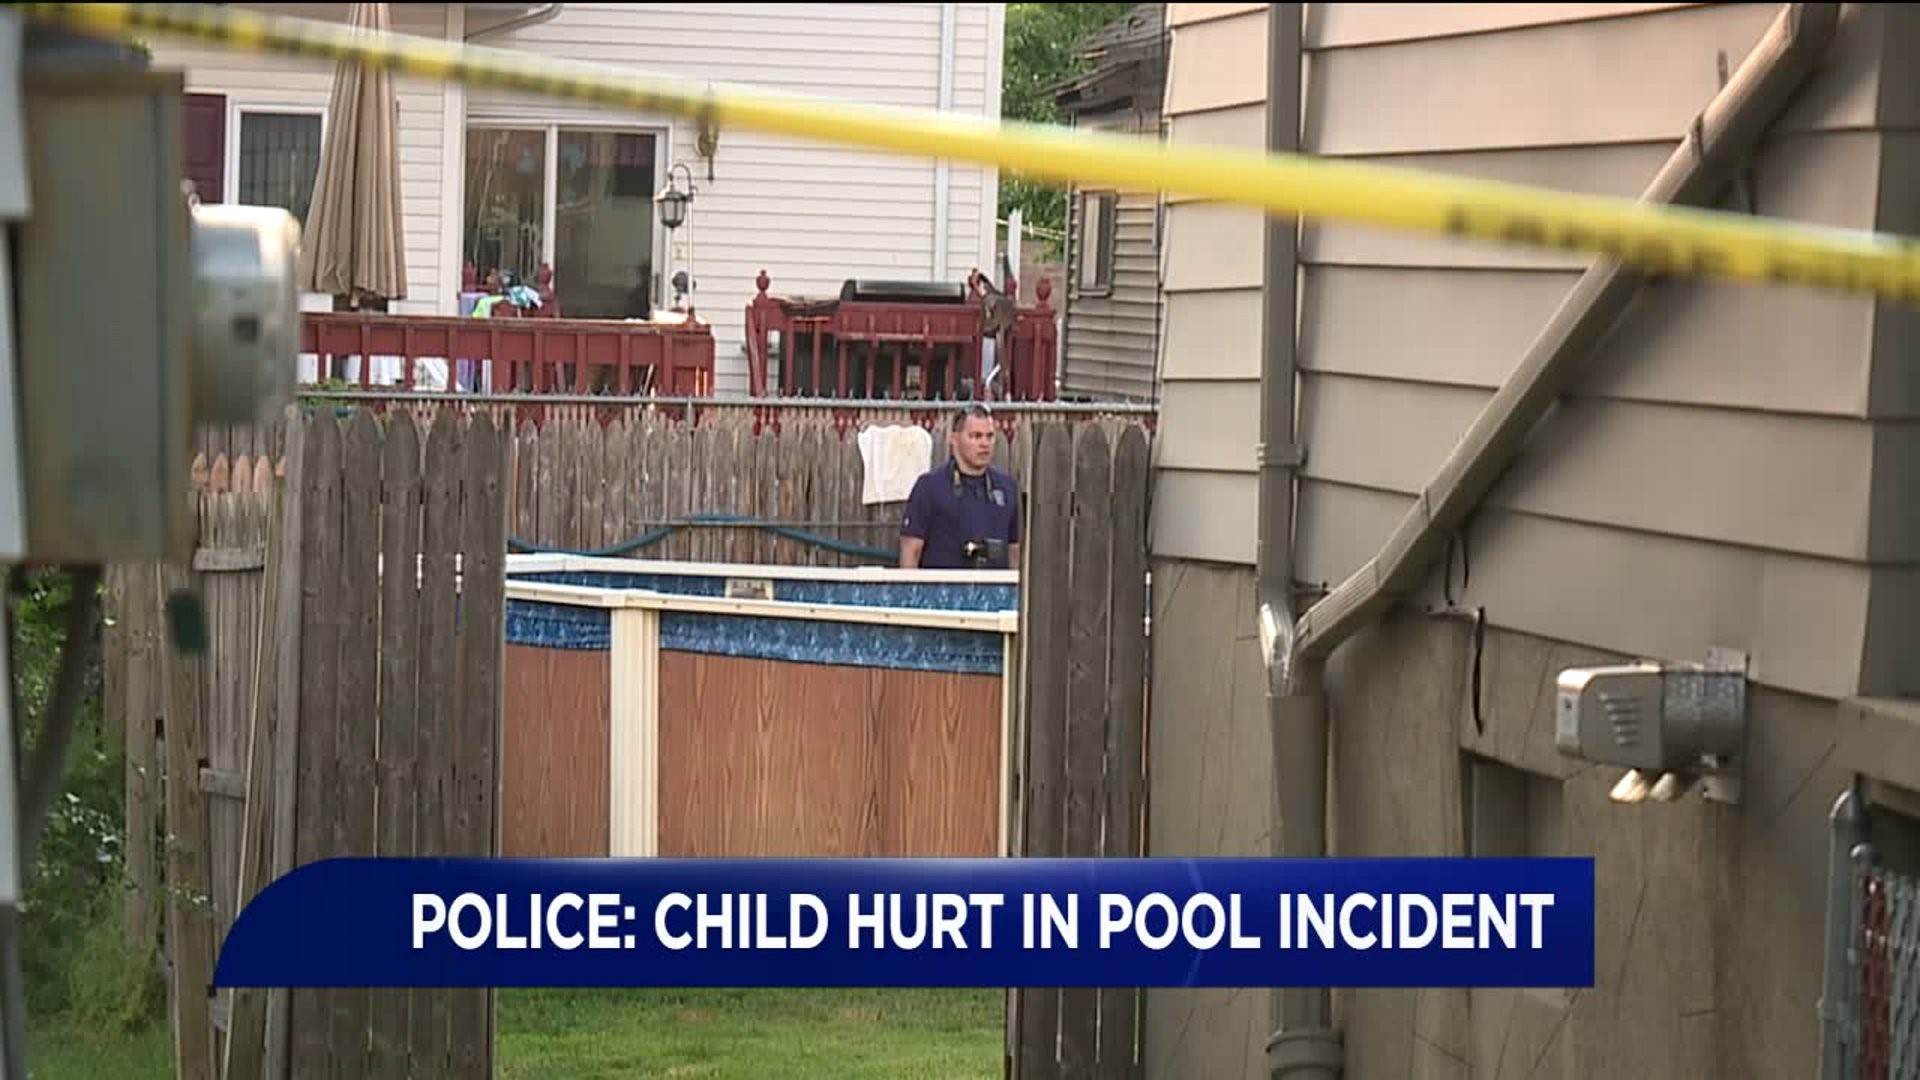 2-year-old Flown to Hospital After She was Hurt in a Swimming Pool